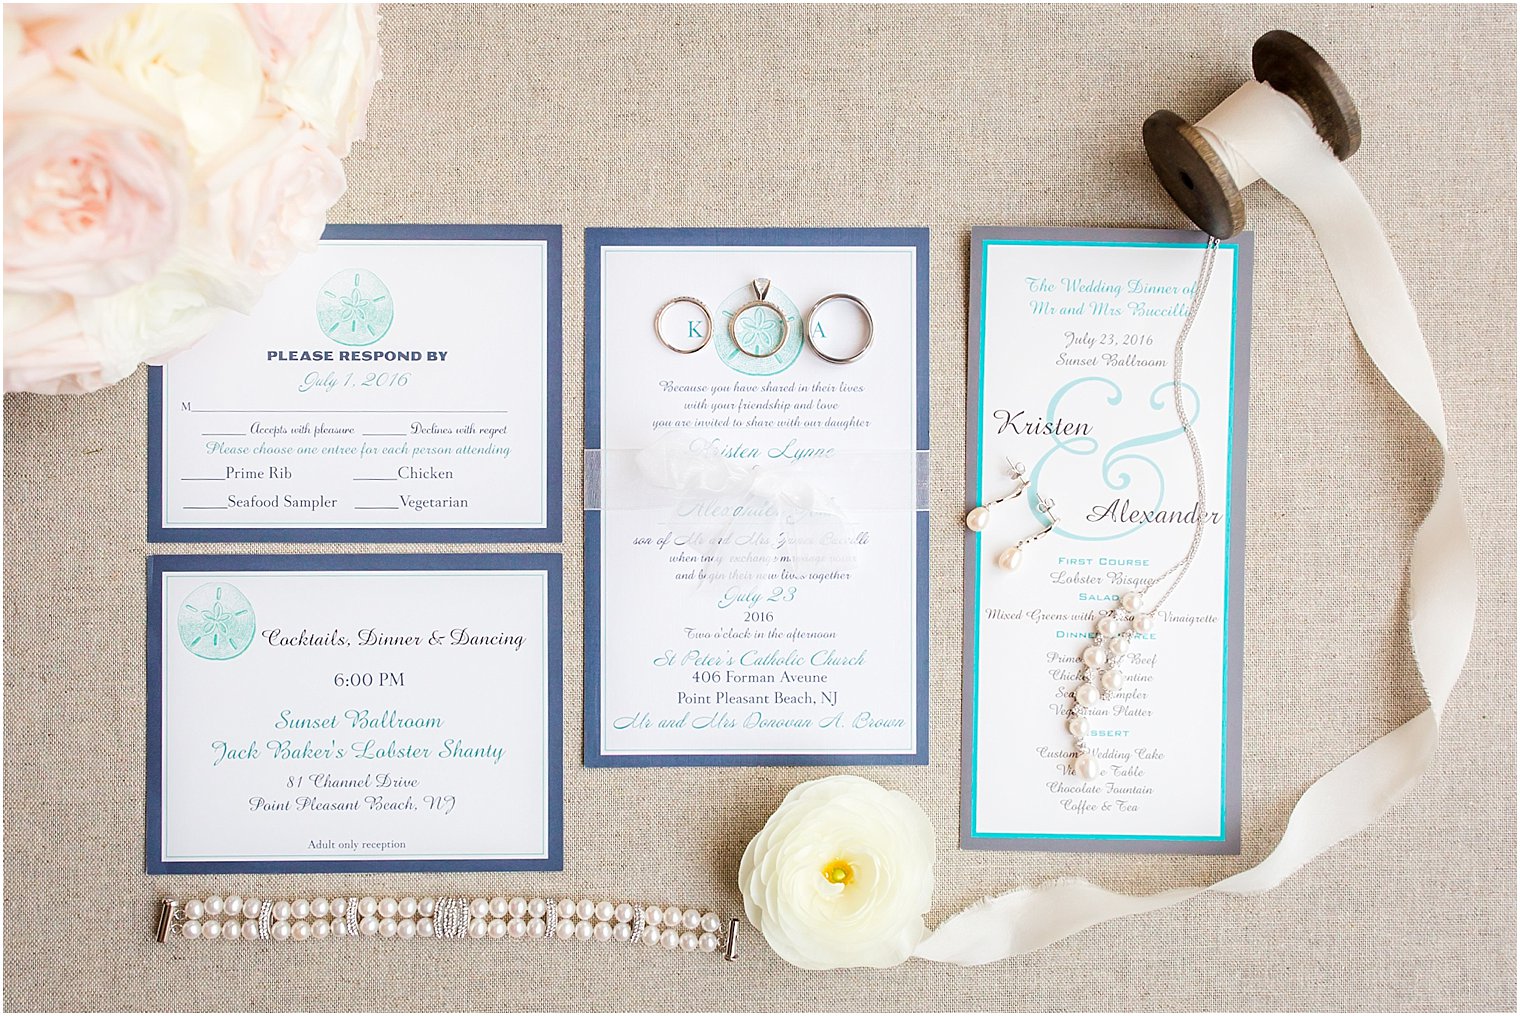 Invitations by Vista Print | Florals by Something Nice Floral Designs